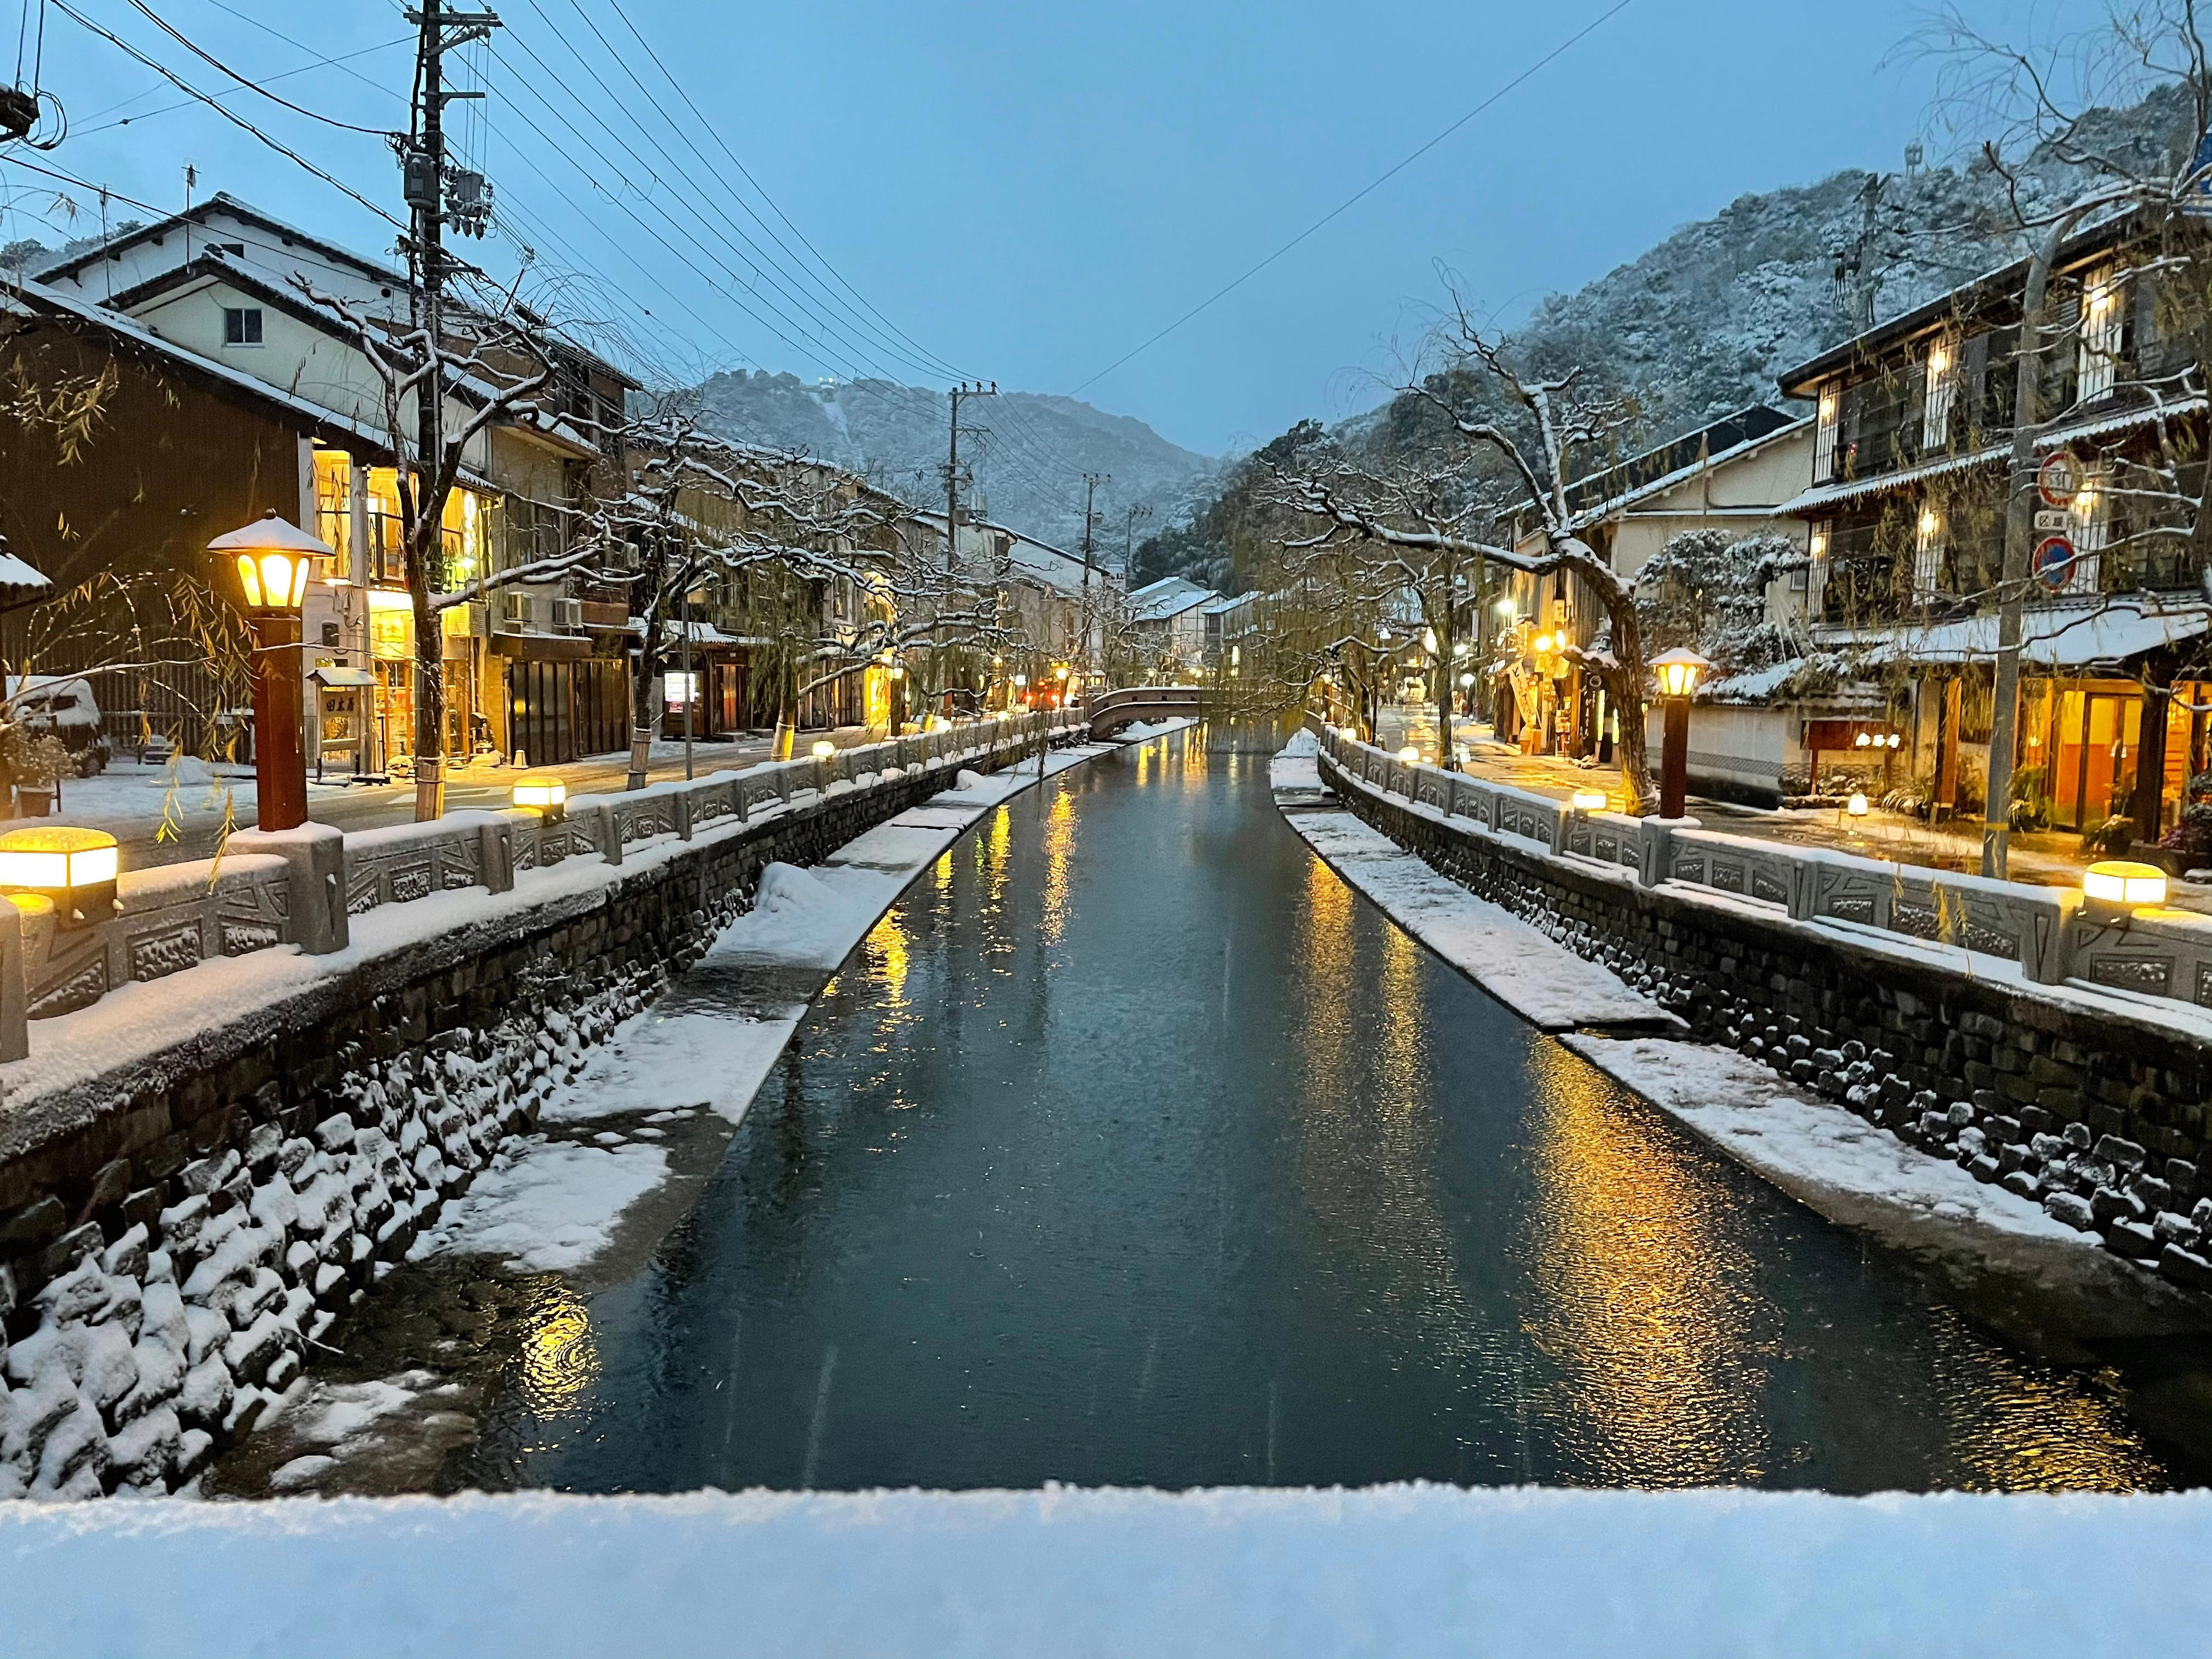 <p>If you want to relax, visit Kinosaki, also known as Kinosaki Onsen, a small town in western Japan that is popular for <a href="https://visitkinosaki.com/about-kinosaki/" rel="noopener nofollow sponsored">its hot springs</a>, or onsens. The quaint town is about a <a href="https://visitkinosaki.com/access/#access_train" rel="nofollow noopener sponsored">two-and-a-half-hour train ride</a> from Kyoto.</p><p>The town has <a href="https://visitkinosaki.com/about-kinosaki/the-7-mystic-onsen/" rel="nofollow noopener sponsored">seven onsens</a>, which are all located along the same road within walking distance of each other. Each onsen is unique in its design, but they all have either outdoor or indoor baths, or both, and some have saunas and garden areas.</p><p><a href="https://visitkinosaki.com/things-to-do/kono-yu/" rel="nofollow noopener sponsored">Kono-yu</a> is the oldest onsen in town and has an outdoor bath in a peaceful garden setting. <a href="https://visitkinosaki.com/things-to-do/satono-yu/" rel="nofollow noopener sponsored">Satono-yu</a> is a more modern onsen that has both Japanese- and Turkish-style baths, including a bath on a third-floor observation deck with views of the town. You can purchase individual day passes to the onsens for <a href="https://visitkinosaki.com/about-kinosaki/the-7-mystic-onsen/" rel="nofollow noopener sponsored">about $5 to $6 each</a>.</p><p>Pair a dip in an onsen with a visit to <a href="https://visitkinosaki.com/things-to-do/onsen-ji-temple/" rel="noopener noreferrer nofollow sponsored">Onsenji Temple</a>, an ancient Buddhist temple on a mountainside in the nearby city of Toyooka, about <a href="https://www.japan-guide.com/e/e3529.html" rel="noopener noreferrer nofollow sponsored">a 20-minute walk from Kinosaki</a>. Onsenji is considered the guardian temple of the onsens, and visiting was a traditional way to prepare to enter the hot springs and ask for a blessing to <a href="https://visitkinosaki.com/things-to-do/onsen-ji-temple/" rel="noopener noreferrer nofollow sponsored">receive the water's purported healing properties</a>, according to <a href="https://visitkinosaki.com/things-to-do/onsen-ji-temple/" rel="noopener">Visit Kinosaki</a>.</p><p>You can <a href="https://visitkinosaki.com/things-to-do/ropeway-hiking-course/" rel="nofollow noopener sponsored">hike</a> up a forested path to get to the temple, or take a round-trip ride on <a href="https://kinosaki-ropeway.jp/" rel="nofollow noopener sponsored">the Kinosaki Onsen Ropeway</a>, a tram that goes to the temple, for about <a href="https://kinosaki-ropeway.jp/ropeway/#ropeway04" rel="nofollow noopener sponsored">$6 per person</a>.</p><p>In terms of where to stay, you can spend a night at <a href="https://www.kinosaki.com/" rel="noopener nofollow sponsored">Kinosaki Yamamotoya</a>, a more than 350-year-old ryokan. The cost of a stay at the traditional Japanese inn comes with a one-day pass to all the local hot springs, where you'll probably spend most of your time.</p><p>At around $180 per night, according to <a href="https://affiliate.insider.com?h=48f39360118ecfe282b78ea17dfce205bc703d9f2bea0ee52ffdc7f2abf10e98&platform=msn_reviews&postID=642ade21ba755654617ced15&site=in&u=https%3A%2F%2Fwww.booking.com%2Fhotel%2Fjp%2Fyamamotoya.html%3Faid%3D318615%26label%3DNew_English_EN_NY%253A_New_York_State_23537688865-3HhLaepAvUOrD5Rz7Hri%252AwS217243092435%253Apl%253Ata%253Ap1%253Ap2%253Aac%253Aap%253Aneg%253Afi55350977220%253Atidsa-302962658775%253Alp9067609%253Ali%253Adec%253Adm%26sid%3Dd4a030a9a8b25c7b2a1a6daaf40b1db6%26checkin%3D2023-05-30%26checkout%3D2023-05-31%26srpvid%3D43e088707c050360%26room1%3DA%26from_bs2_modify%3D1%23tab-main&utm_source=msn_reviews" rel="nofollow noopener sponsored">Booking.com</a>, there's an <a href="https://www.kinosaki.com/dining/" rel="noopener nofollow sponsored">included breakfast and kaiseki dinner</a><strong>,</strong> a multi-course meal with intricate small dishes that is <a href="https://www.japan-guide.com/e/e2348.html" rel="nofollow noopener sponsored">a specialty of many traditional ryokans</a>. The dinner also includes the famous Wagyu beef of the region, <a href="https://guide.michelin.com/en/article/features/what-is-tajima-wagyu" rel="noopener nofollow sponsored nofollow sponsored">Tajima,</a> a sought-after kind of the meat that's specific to the Hyōgo Prefecture. </p><p>And if you're visiting between November and March, find a restaurant serving <a href="https://visitkinosaki.com/trip-ideas/snow-crab-season-in-kinosaki-2/" rel="nofollow noopener sponsored">Matsuba-gani</a>, or snow crab, a regional delicacy. </p>